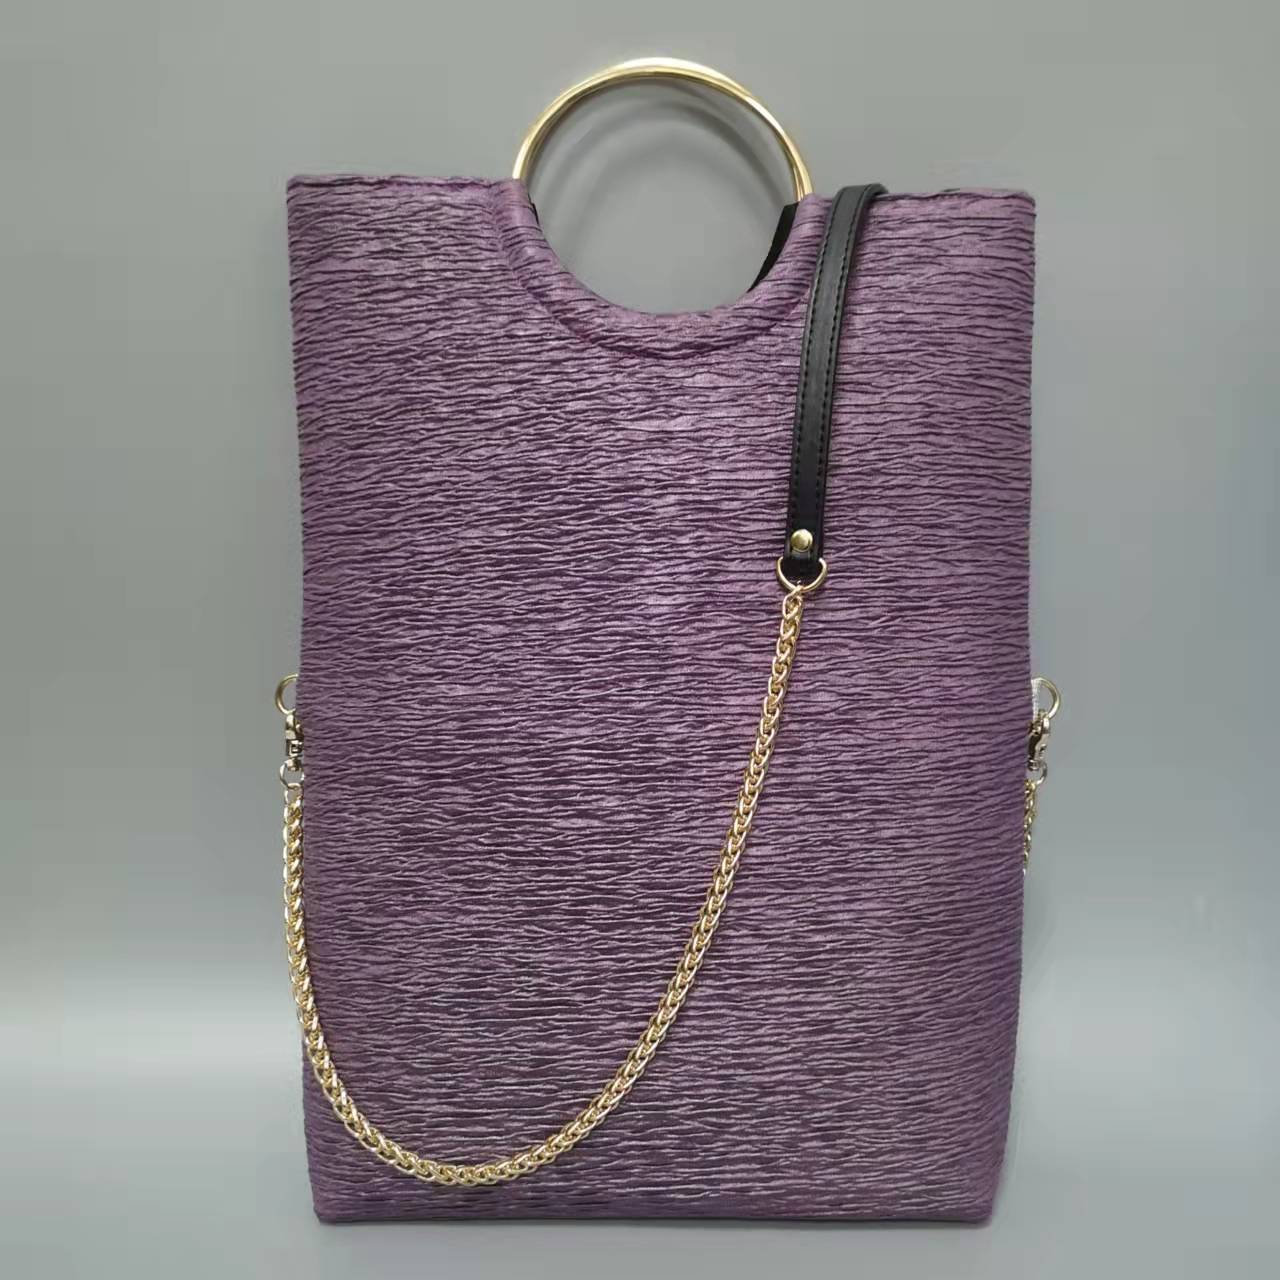 *CTS- Clutch Tote Sling Bag- 1033